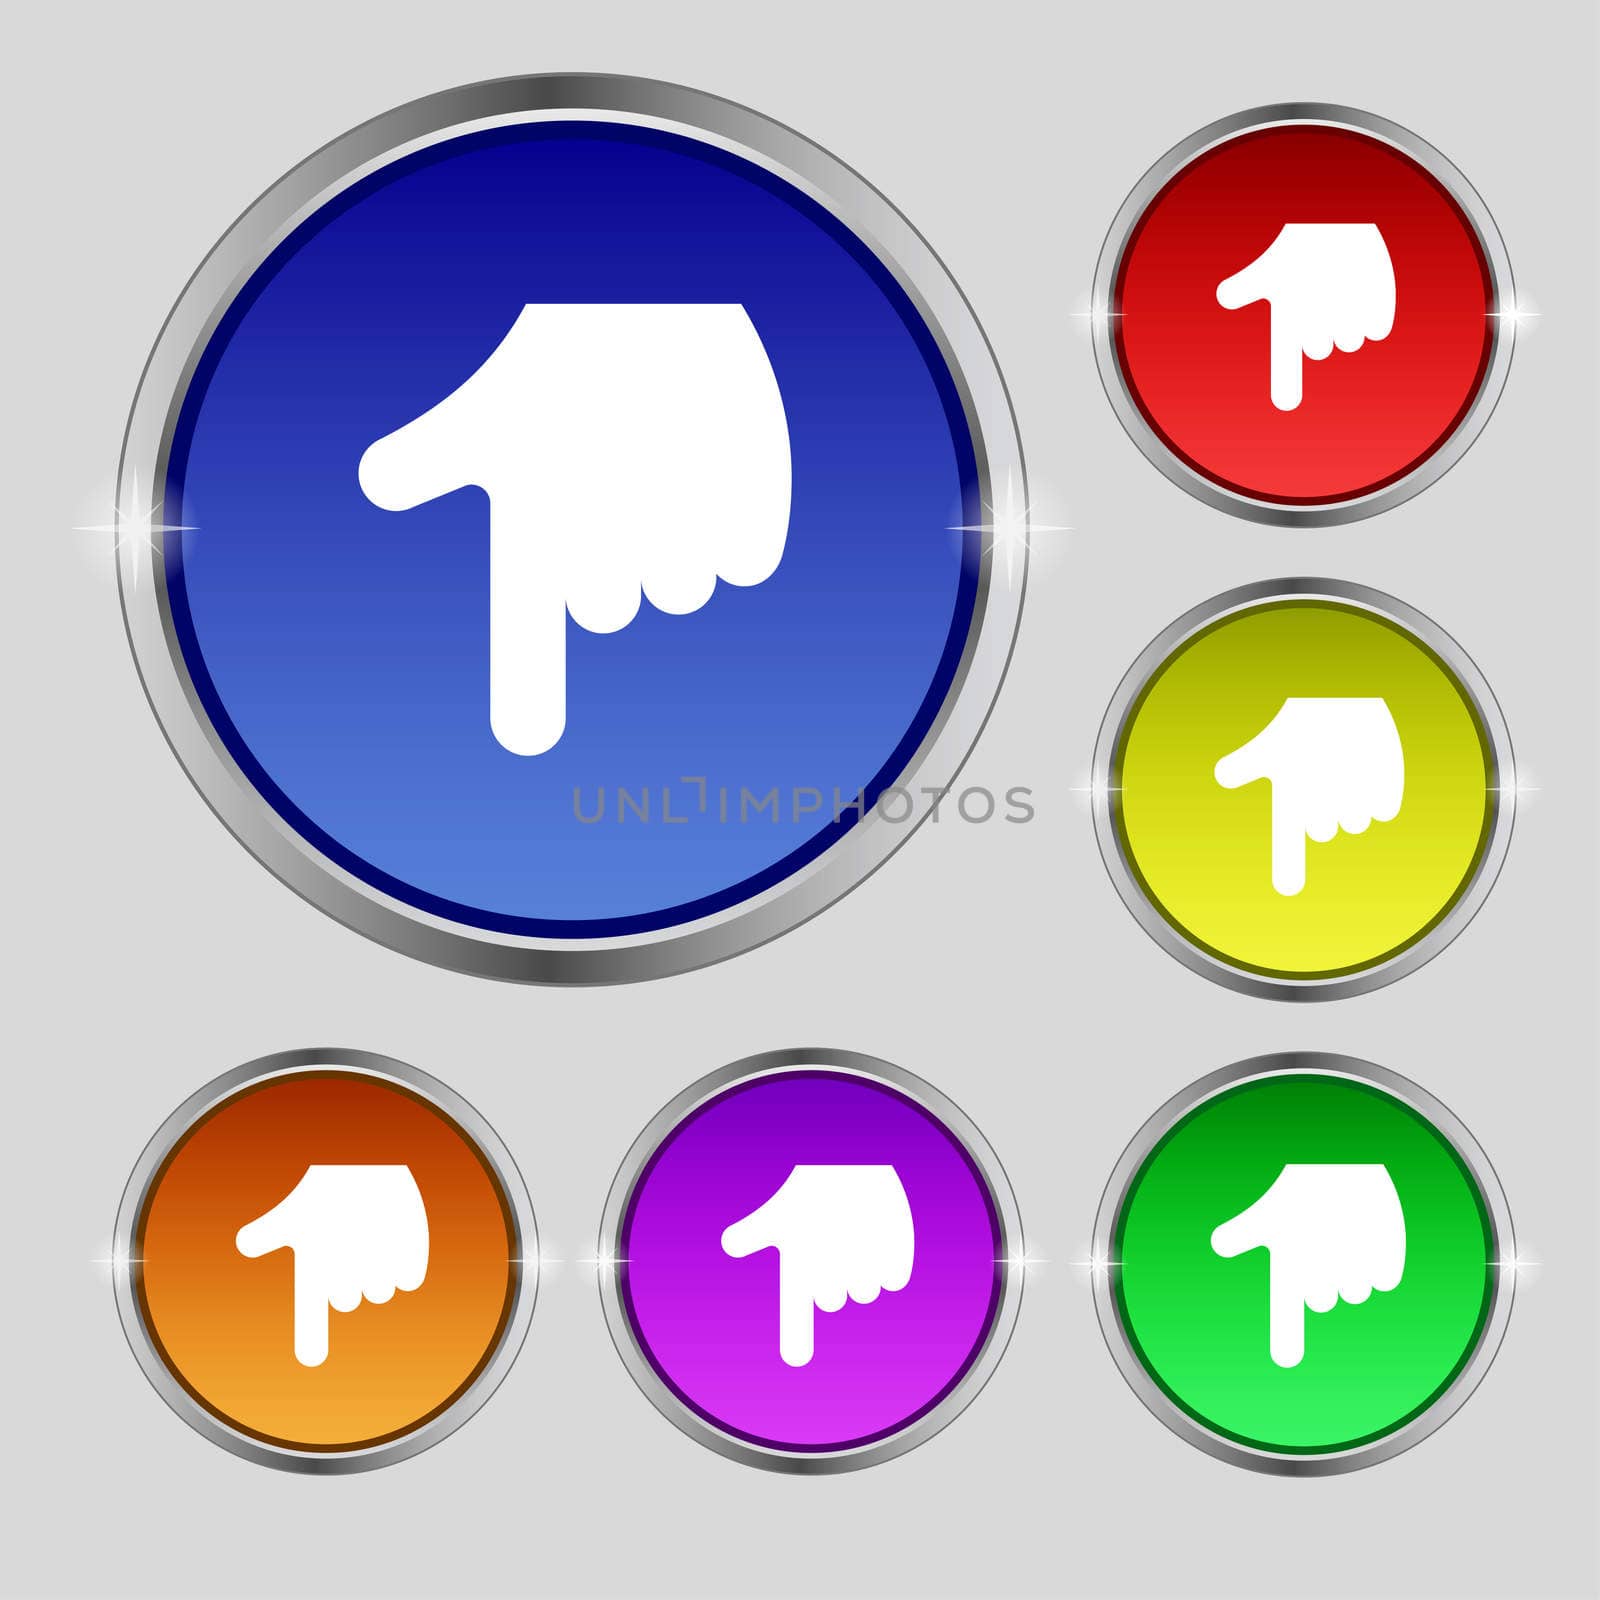 pointing hand icon sign. Round symbol on bright colourful buttons. illustration